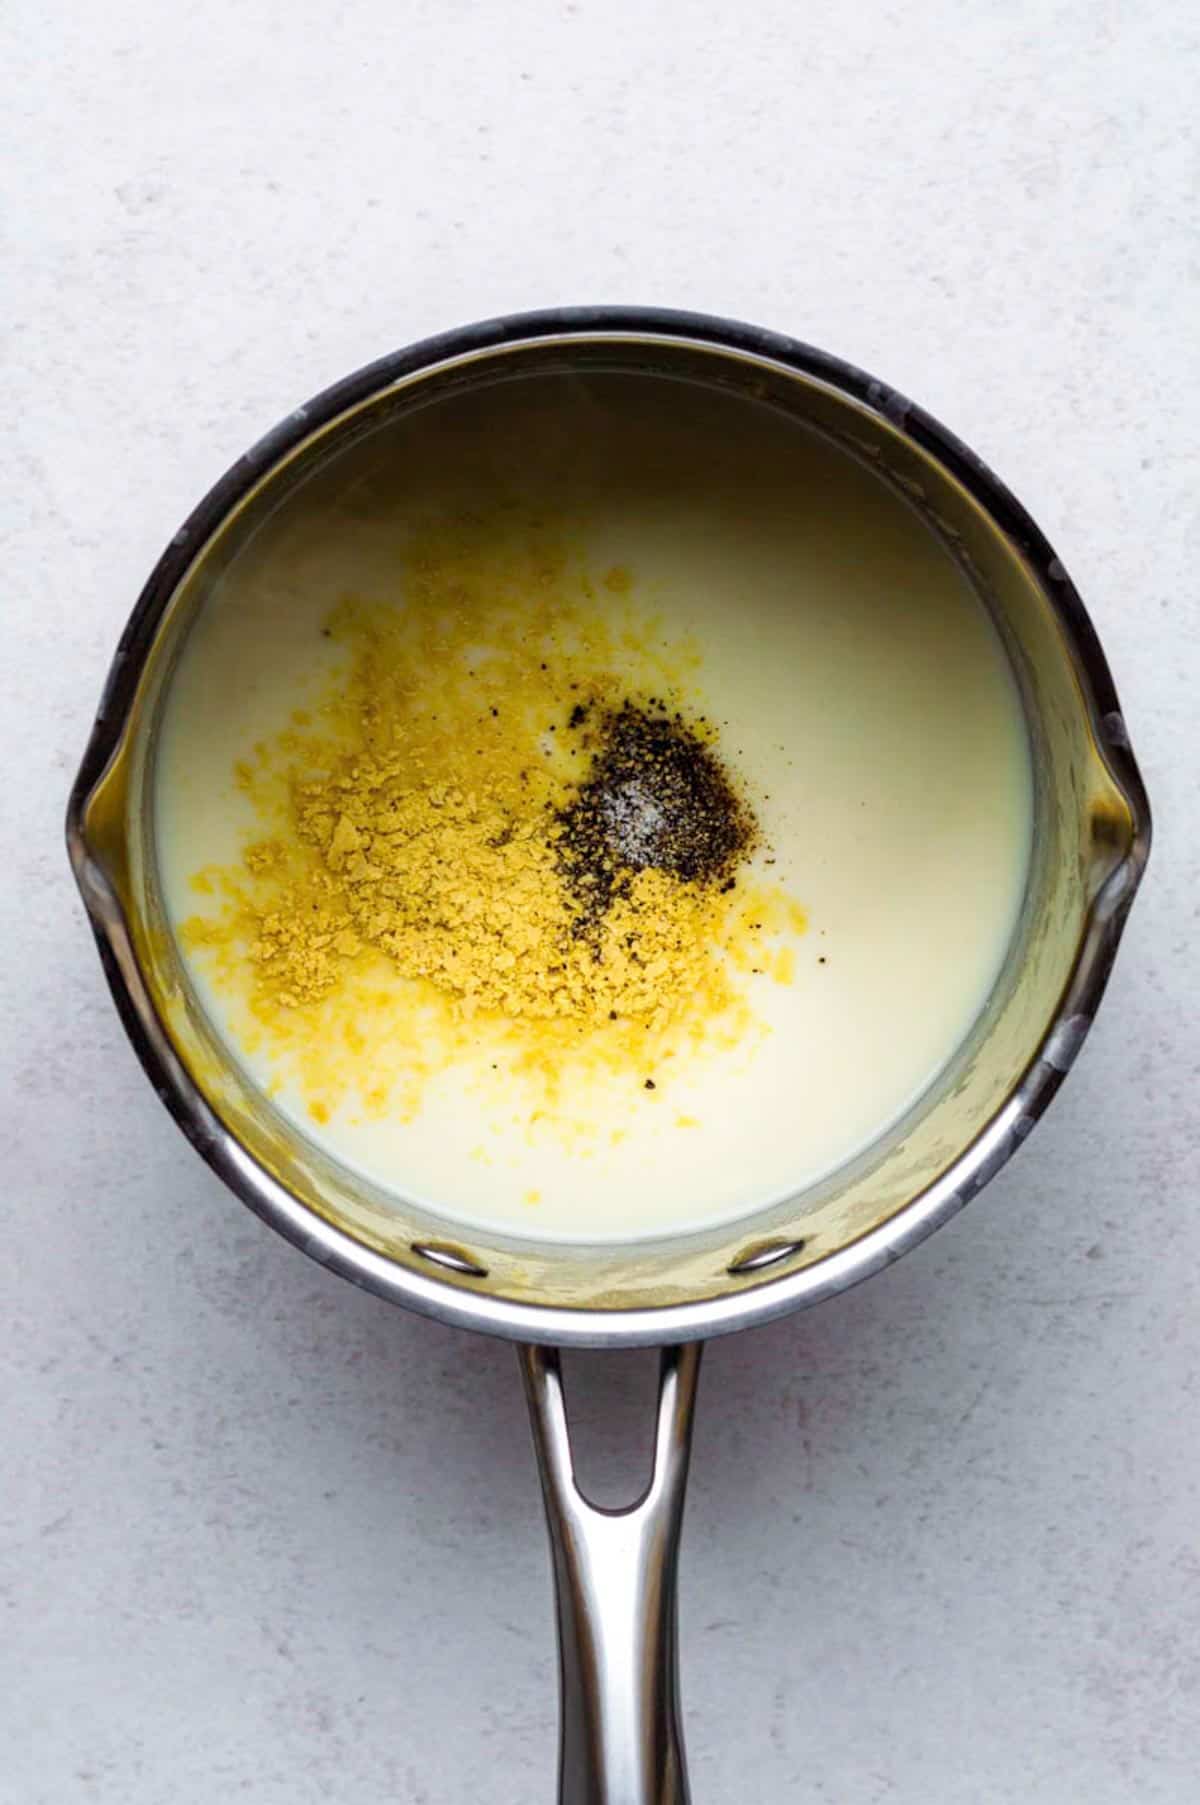 A saucepan filled with vegan white sauce seasoned with nutritional yeast, black pepper, and salt.